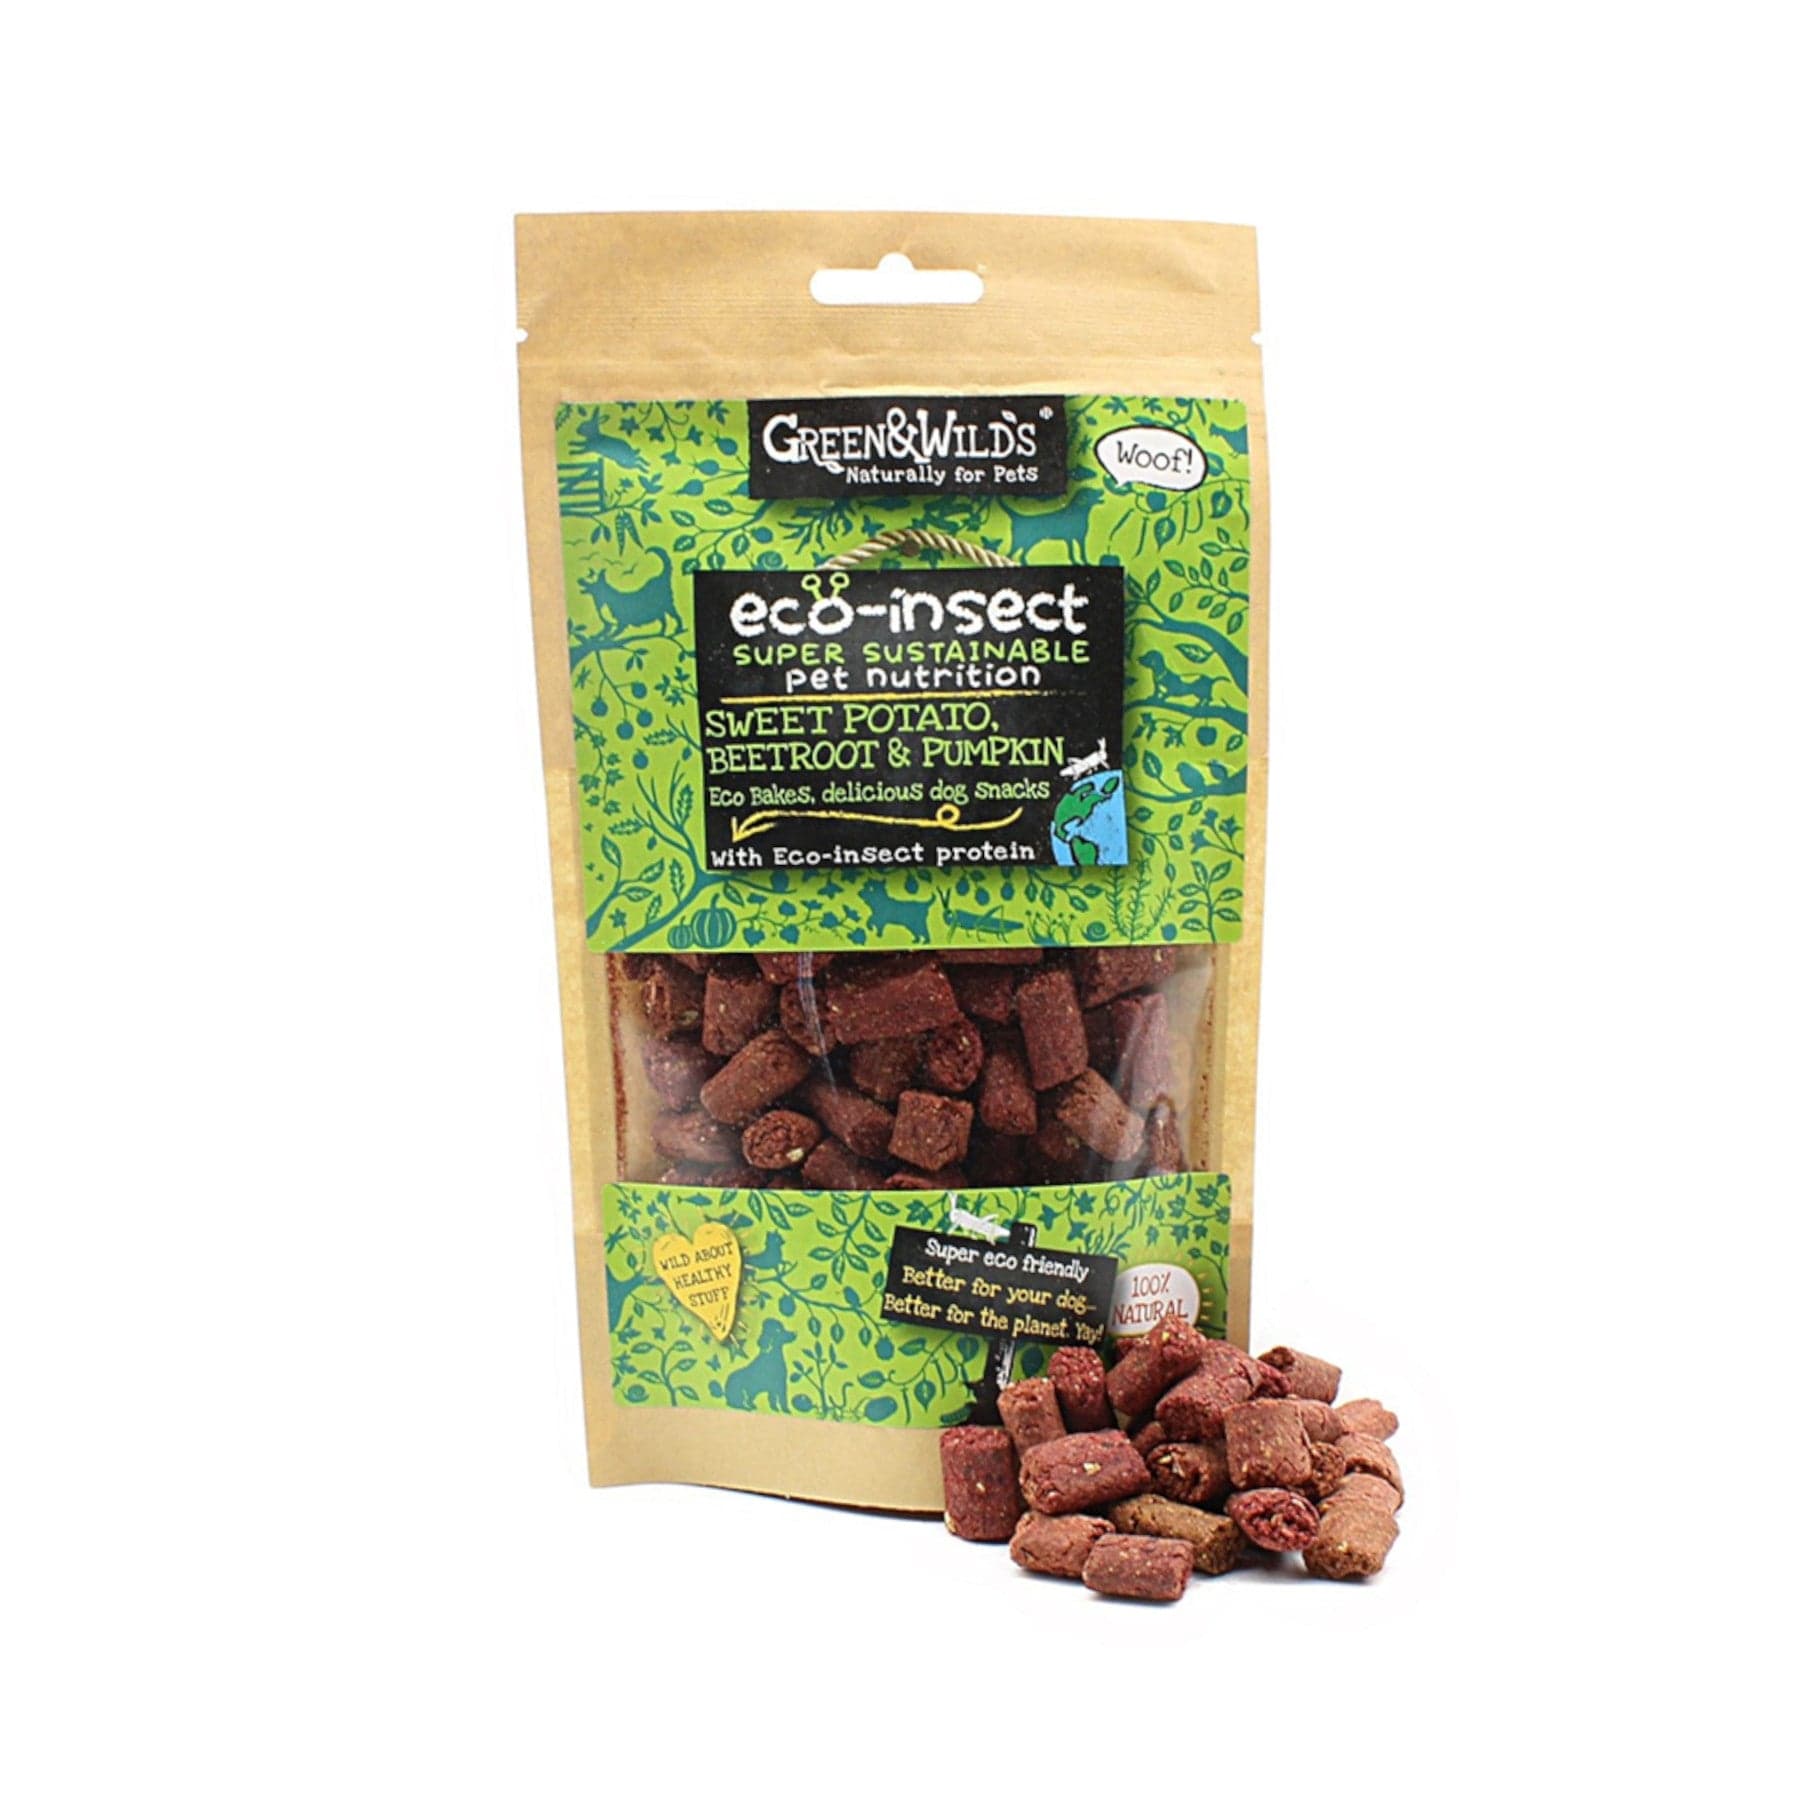 Eco Insect dog treats packaging, Green & Wild's sustainable pet nutrition, sweet potato, beetroot, and pumpkin flavor dog snacks with eco-friendly insect protein.